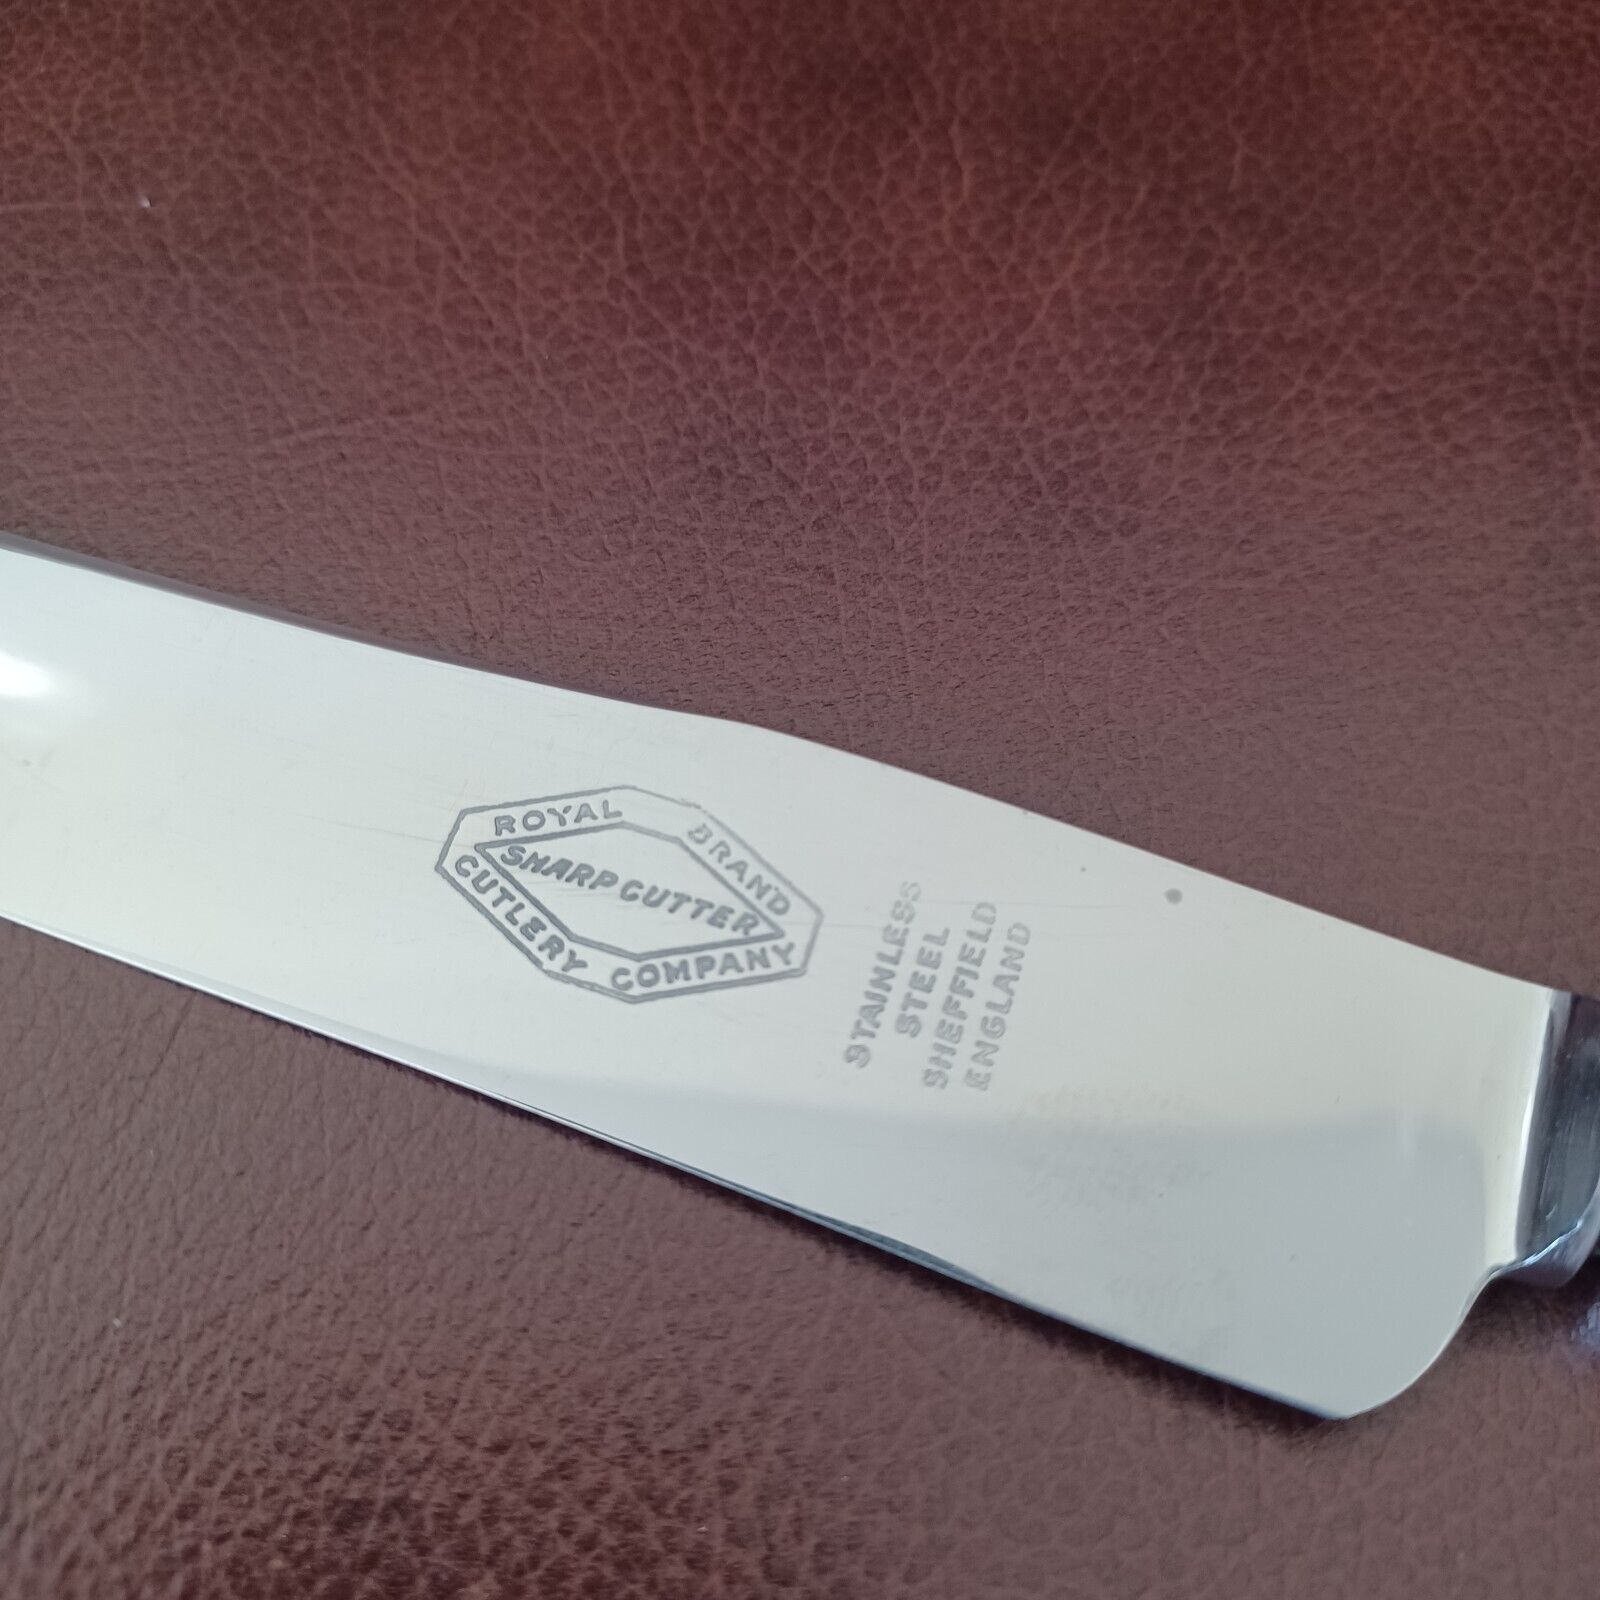 Royal Brand Cutlery Co Sheffield England Stainless Steel Knife EUC Narcissus